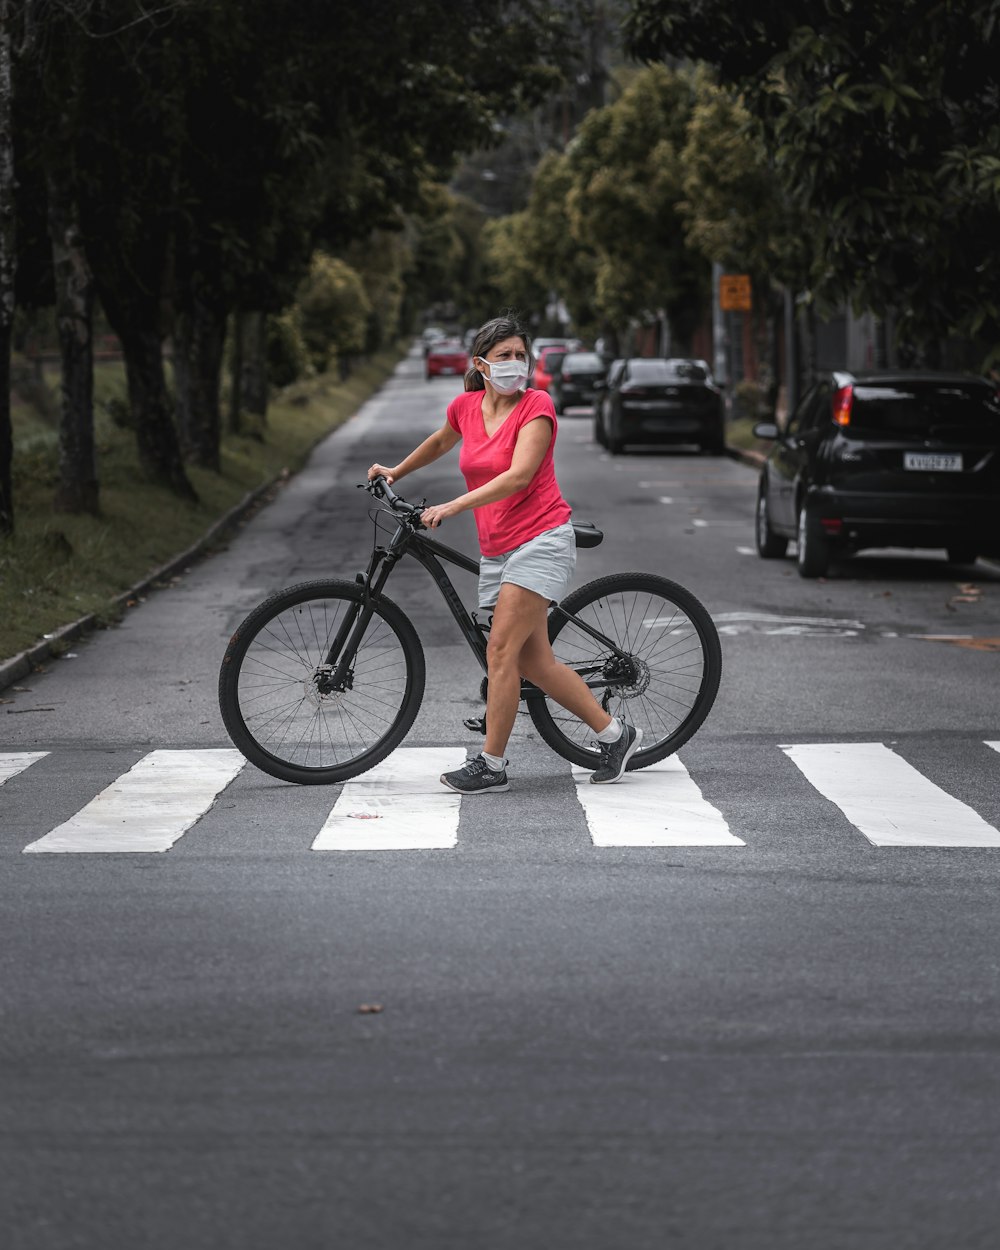 woman in gray tank top riding on black bicycle on road during daytime